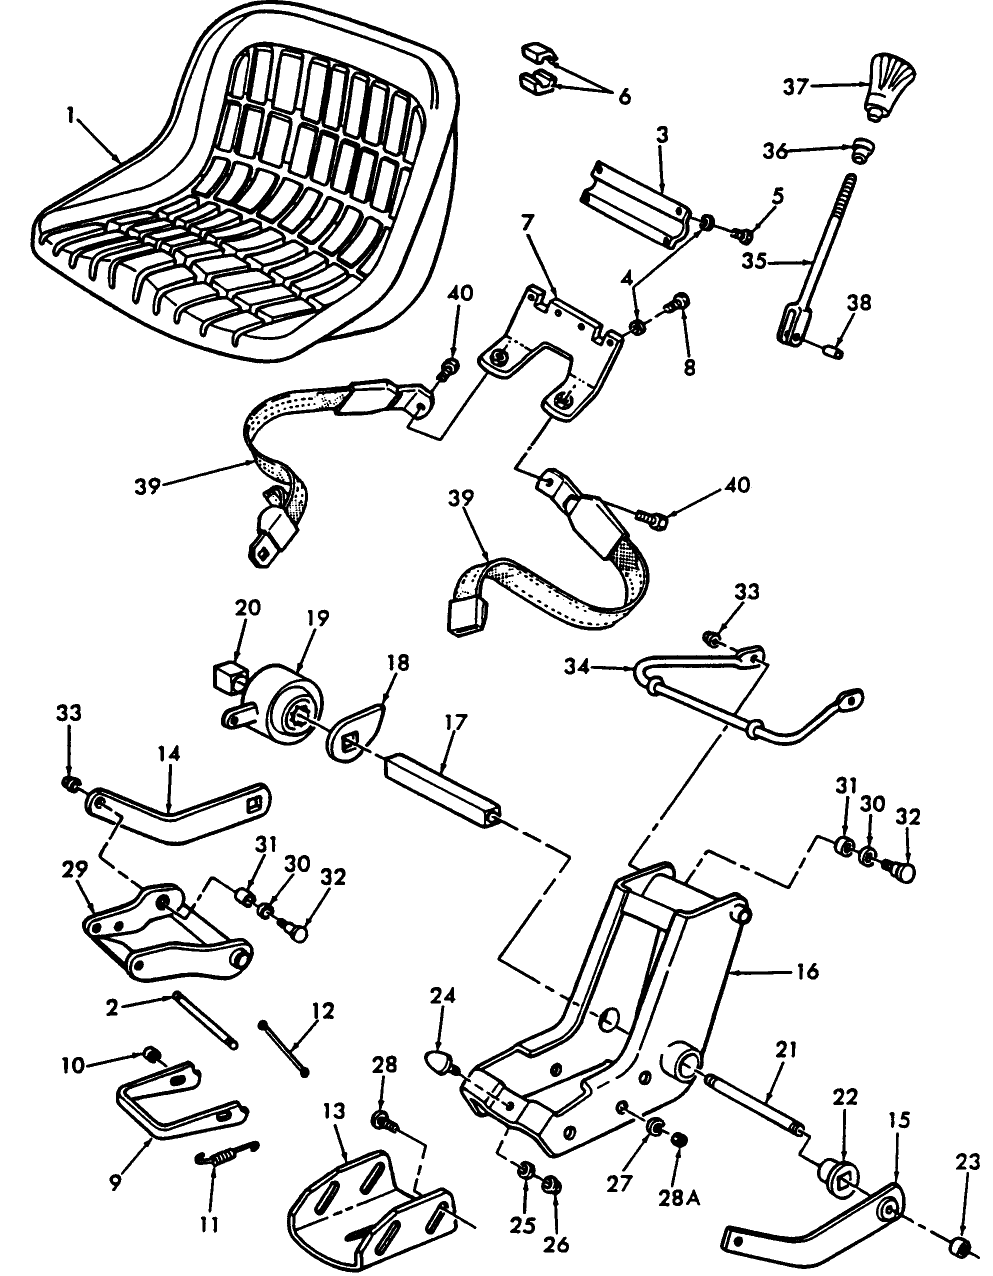 13A01 DELUXE SUSPENSION SEAT ASSEMBLY